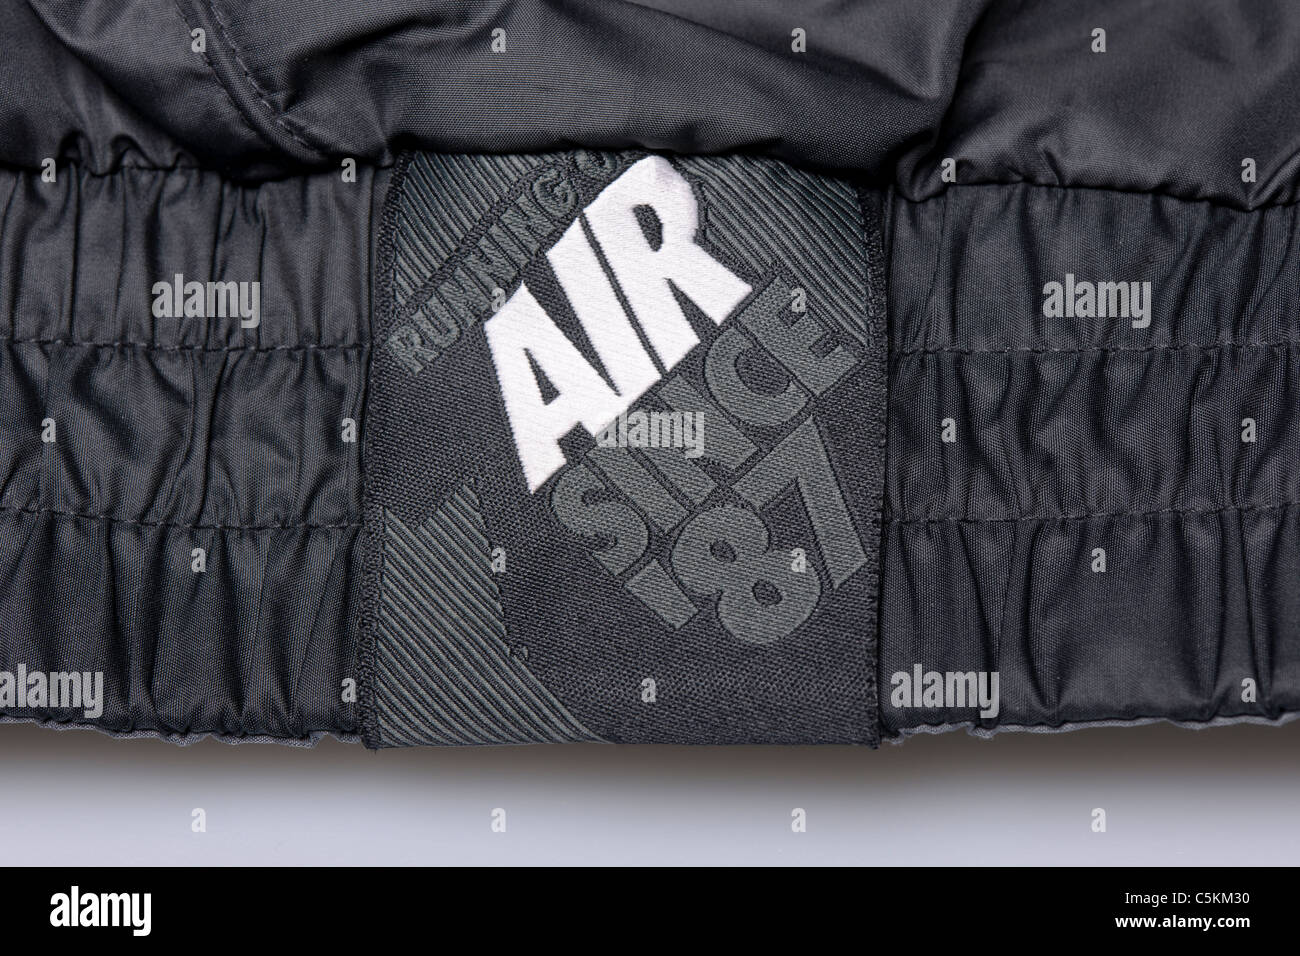 Nike Air men's windrunner sportswear rain jacket. Reversible black with  detail one side, grey the other. Badge detail Stock Photo - Alamy